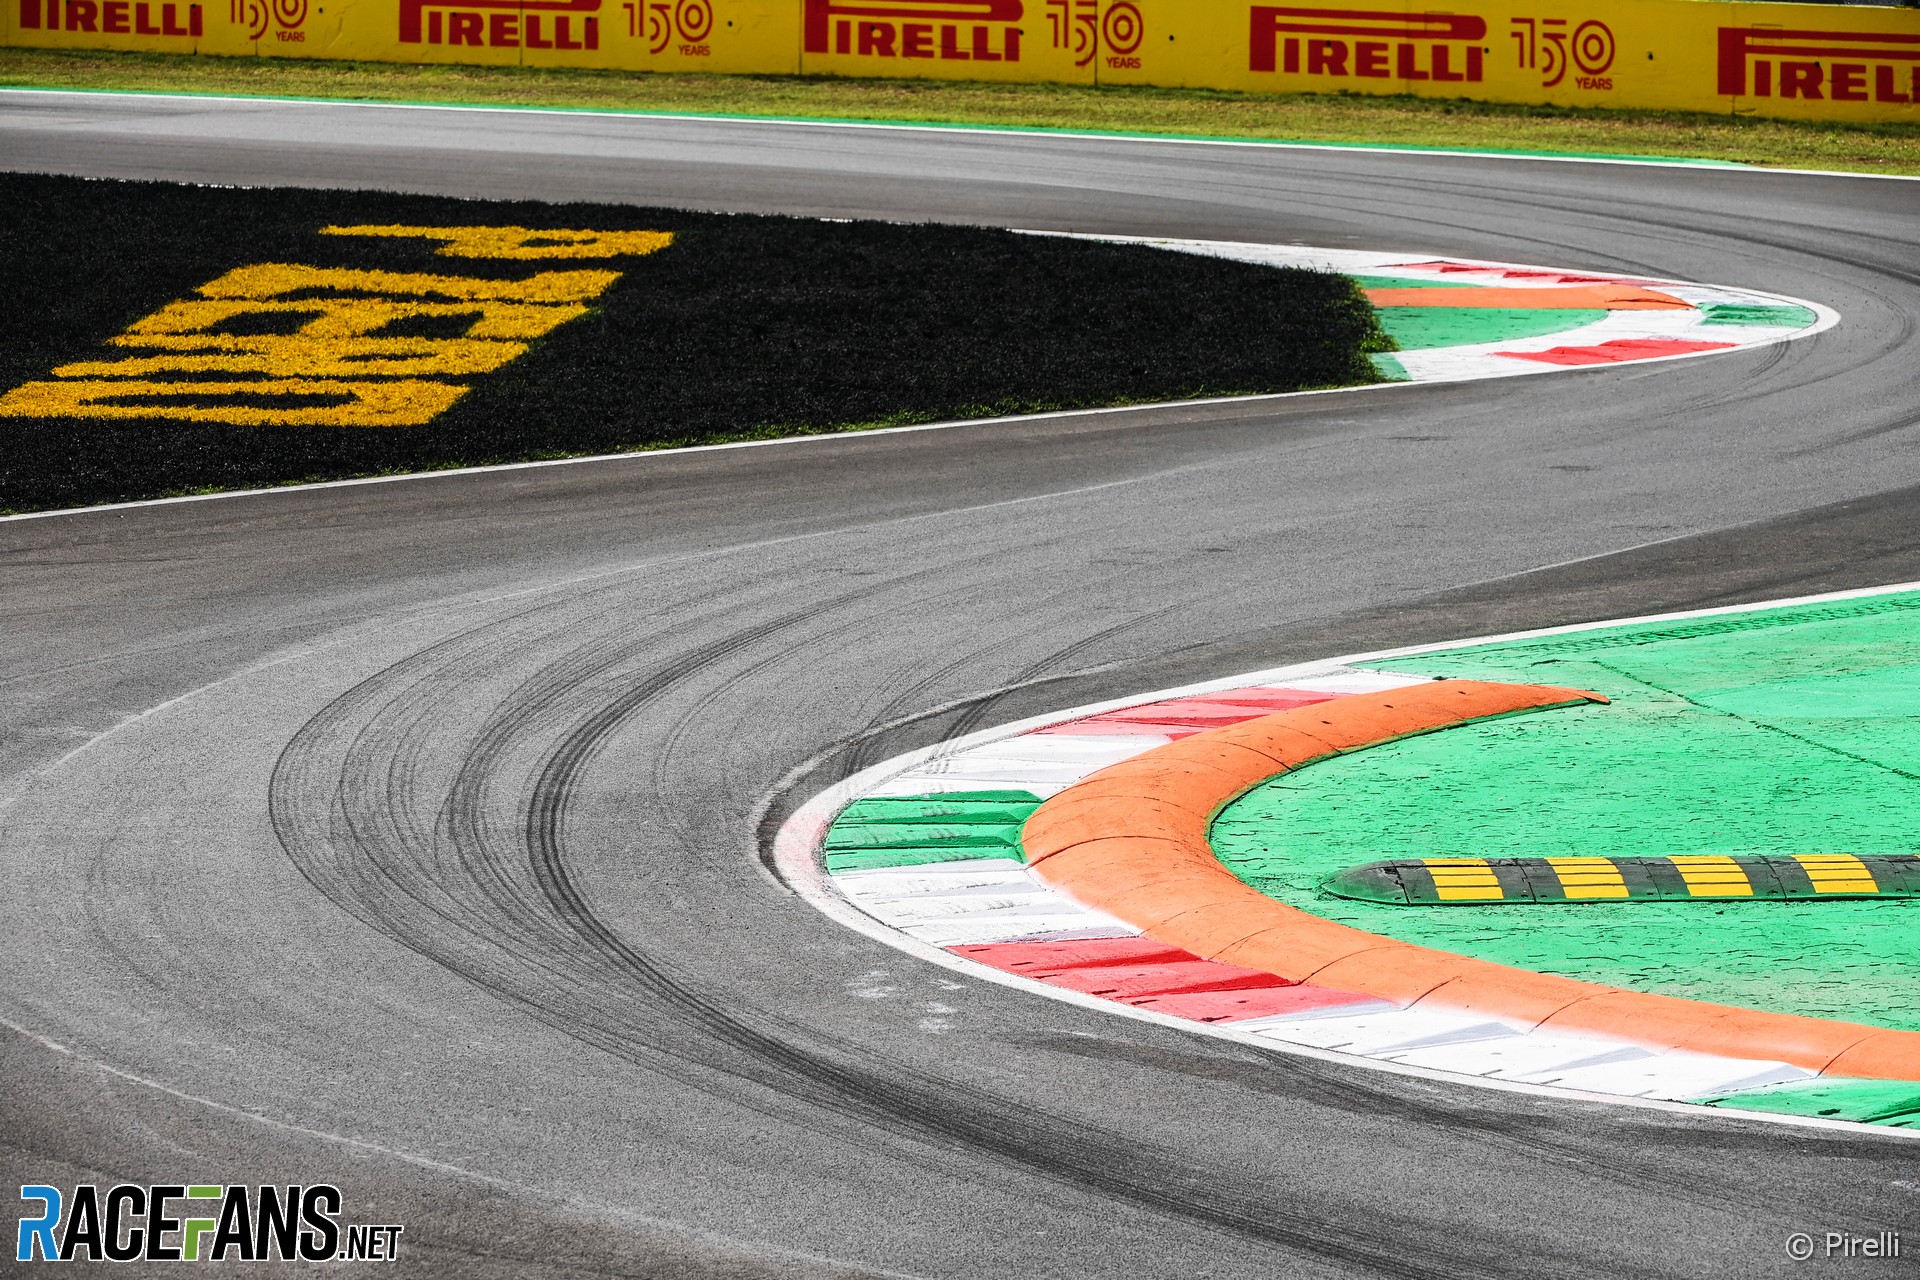 Russell intrigued by “distinctive” racing line resurfacing at Monza · RaceFans